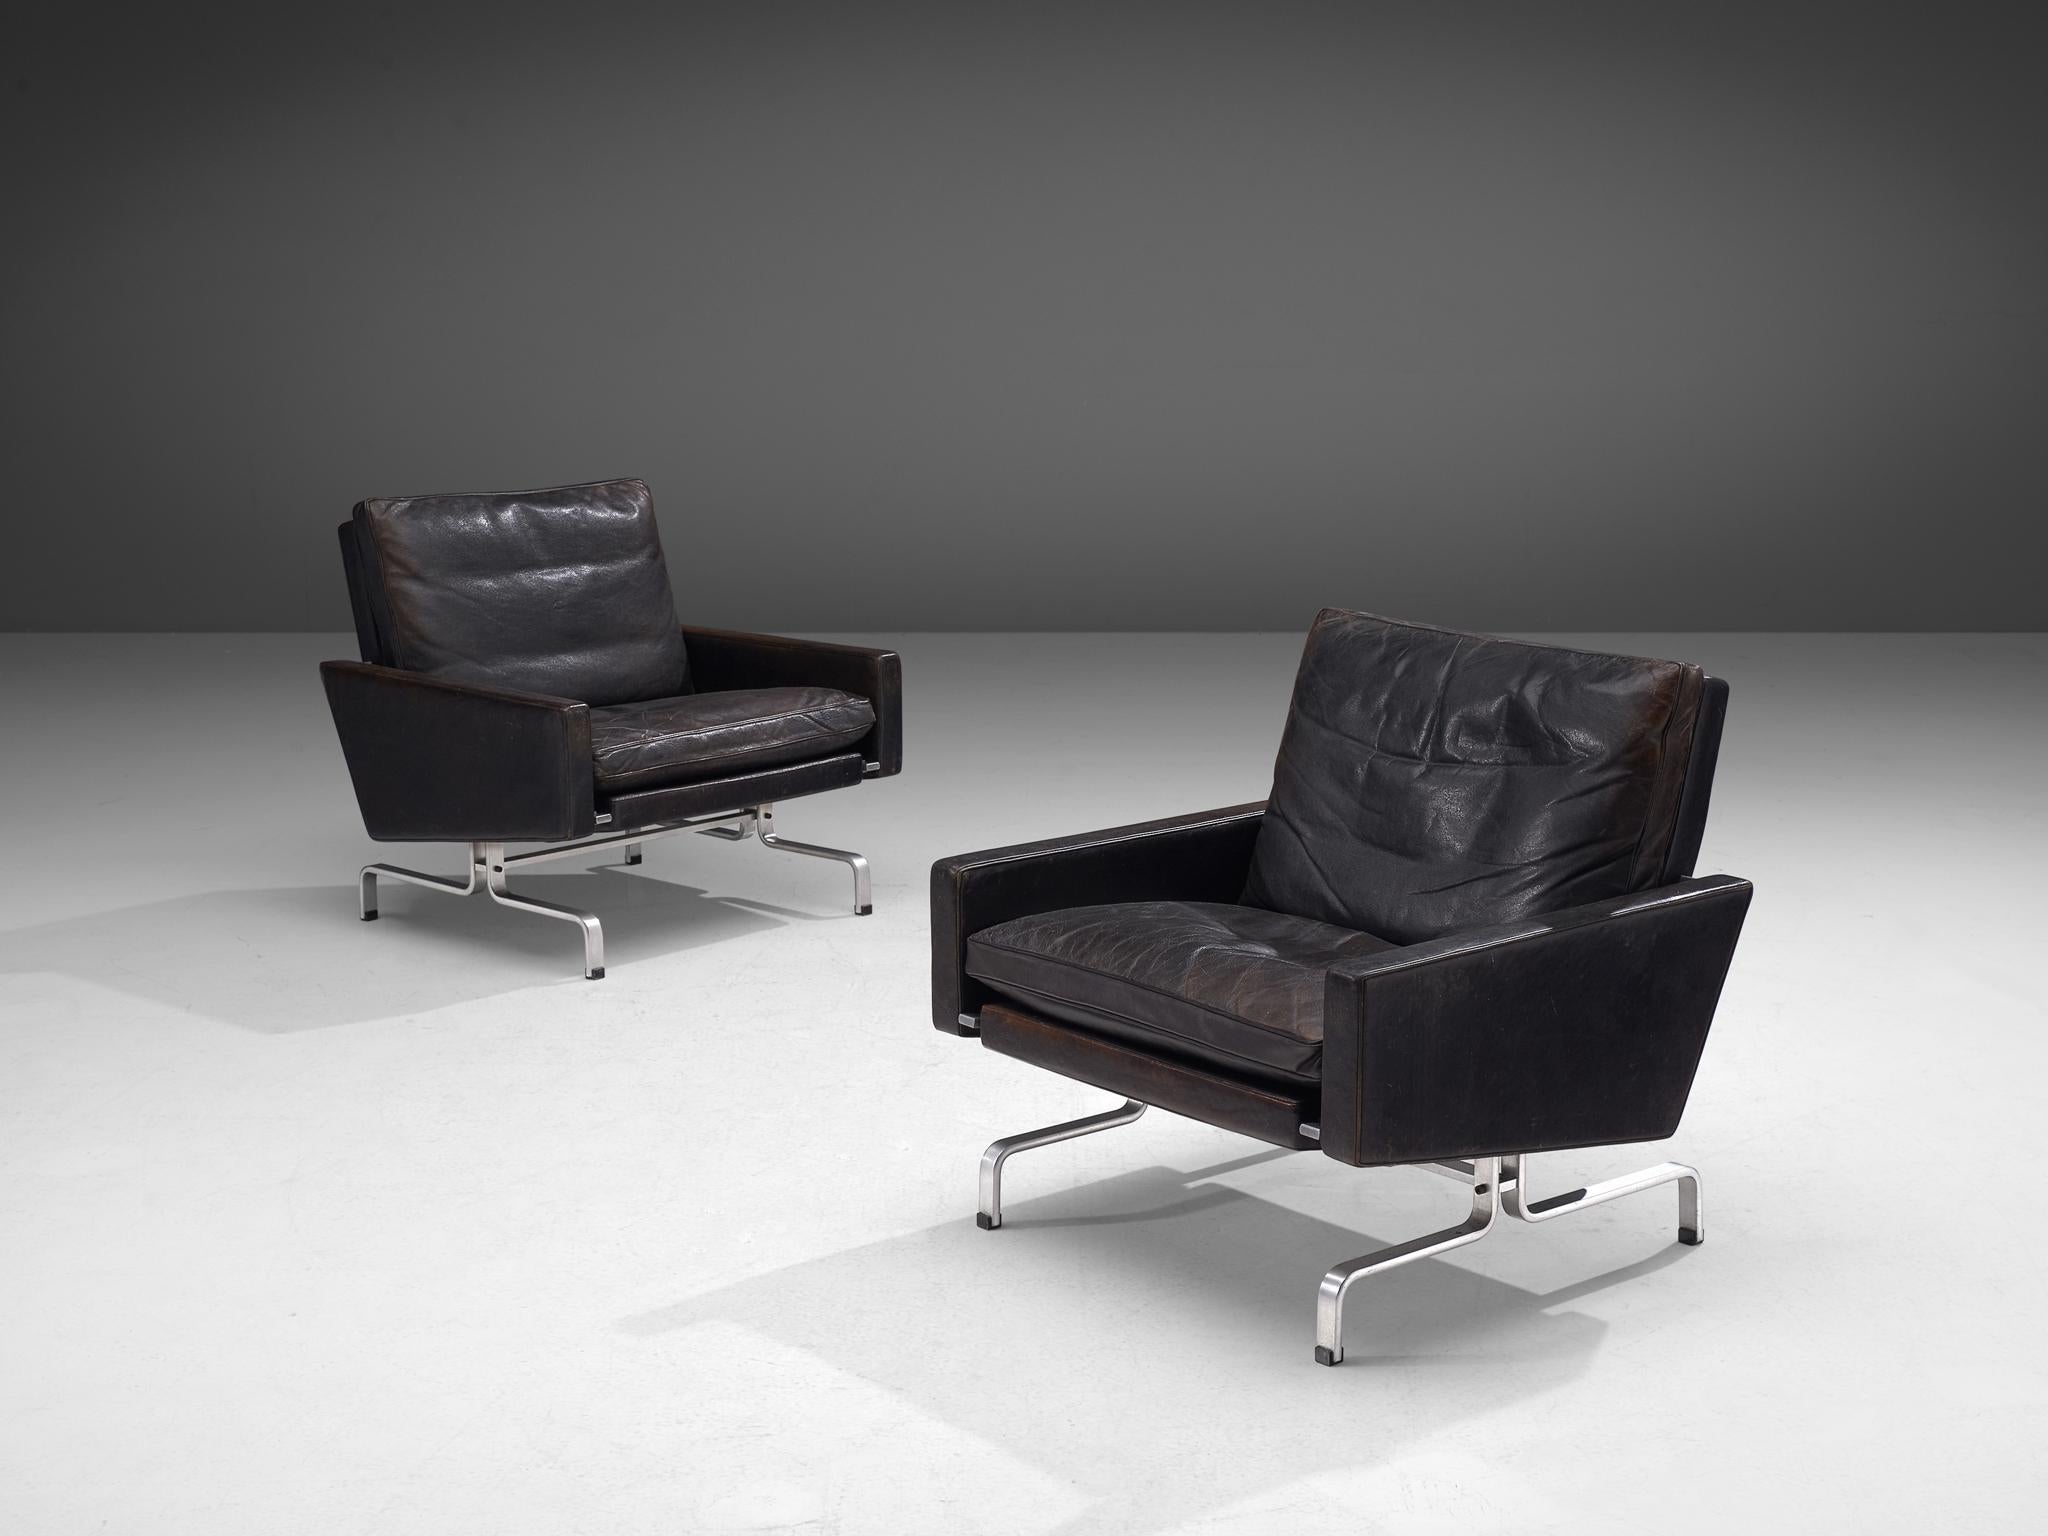 Set of Poul Kjaerholm 'PK31-1' Lounge Chairs and PK31 Sofa in Leather 3